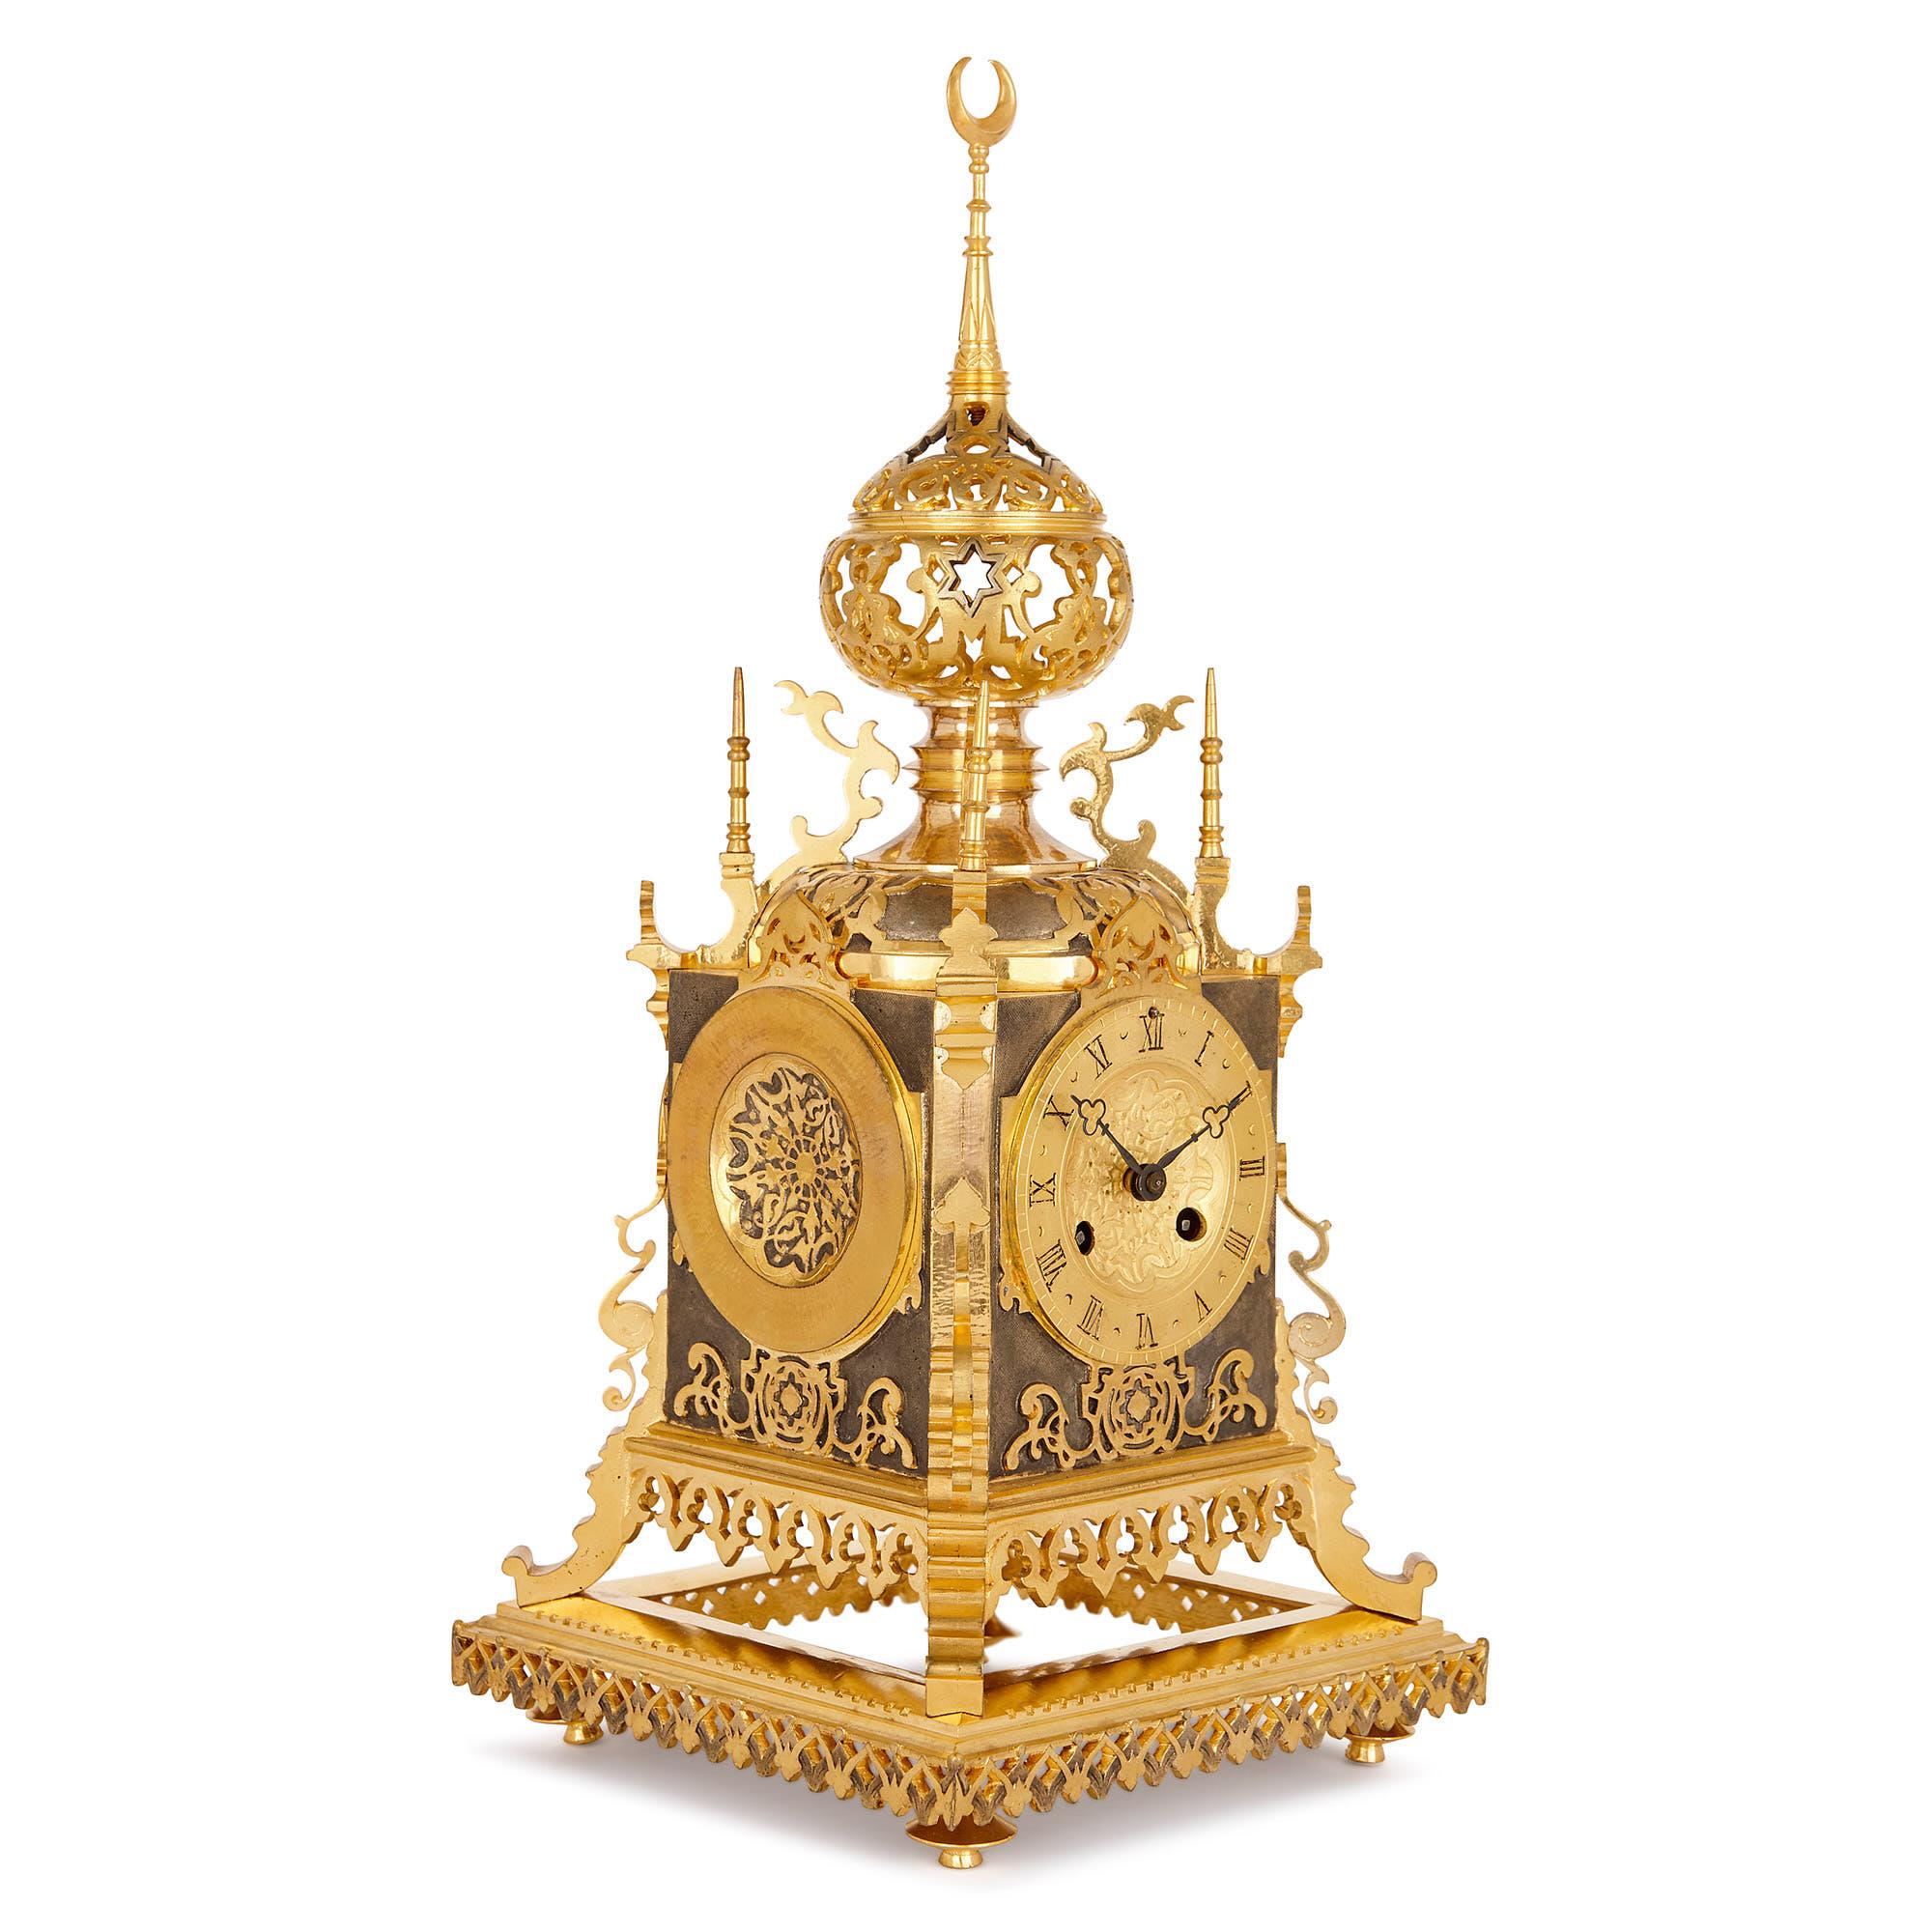 This wonderful mantel clock was crafted in the 19th century by the famous Parisian horology company, Charles Oudin. The back of the clock face is stamped ‘Ch. Oudin, Palais Royal 52’, indicating that the piece was made when the firm was based at